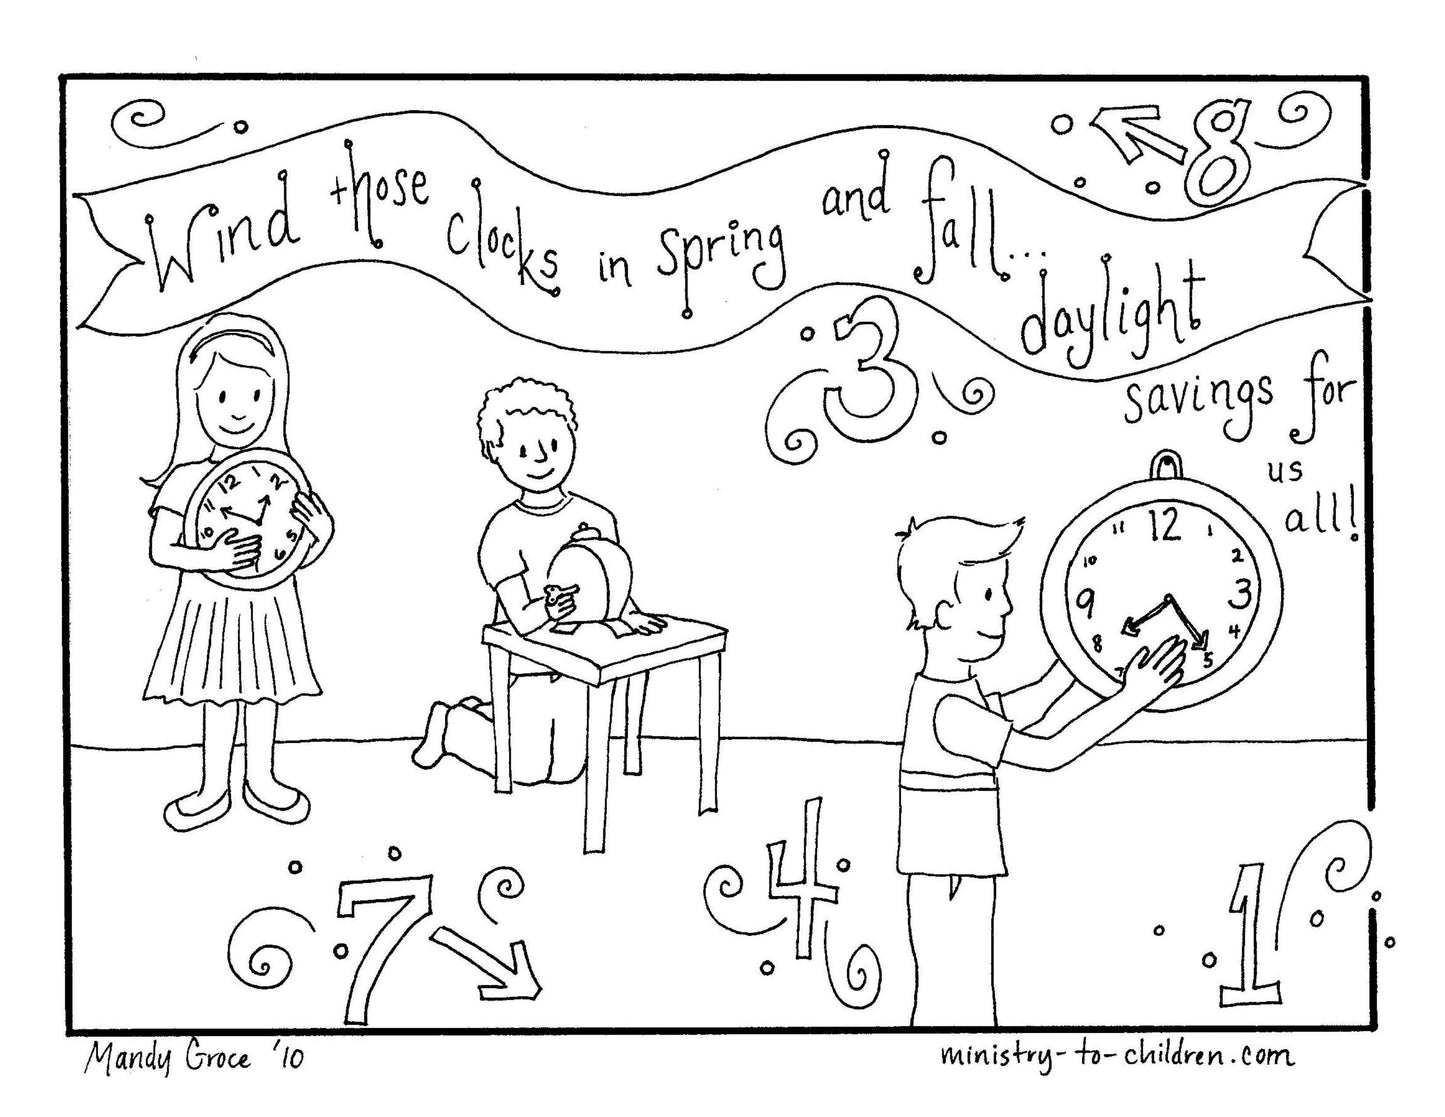 New Year Coloring Pages - Calendar, Seasons, and Daily Routine - 40 Page Download - Sunday School Store 